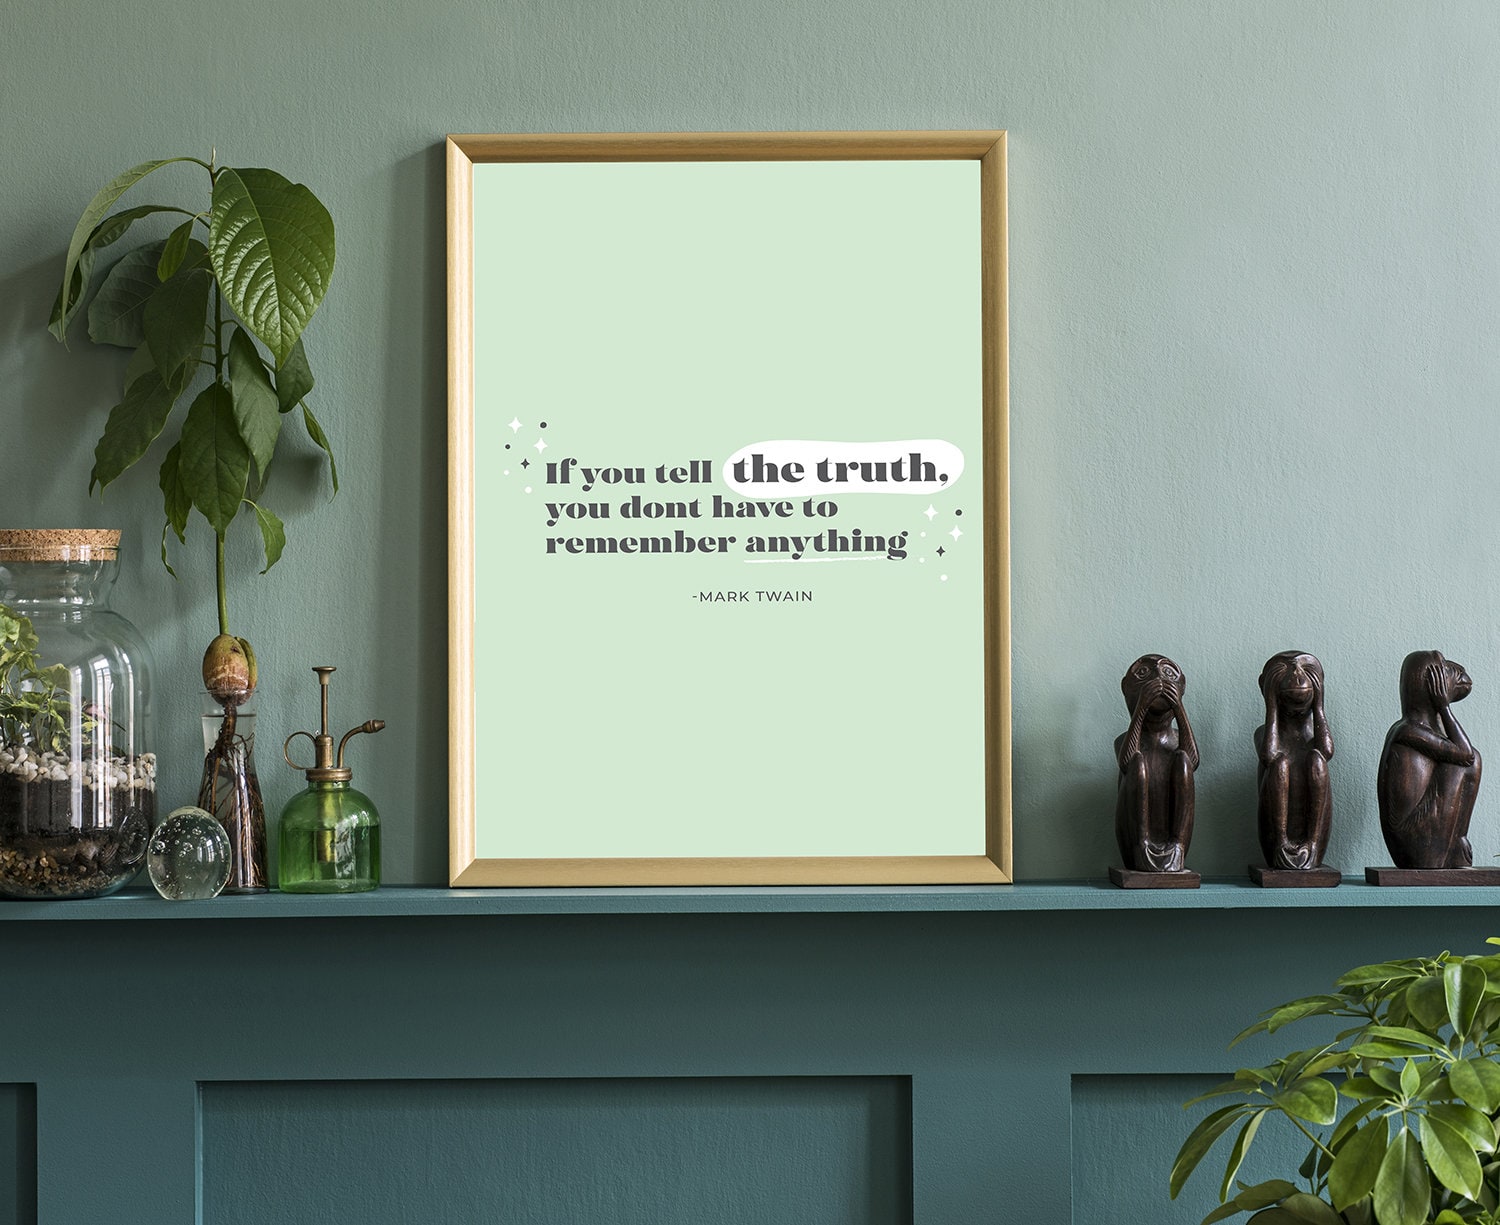 If you tell the truth quote, Mark Twain, Poster Prints, Home wall decor, Dorm room wall art, Office wall art, Motivational quotes, Quotes